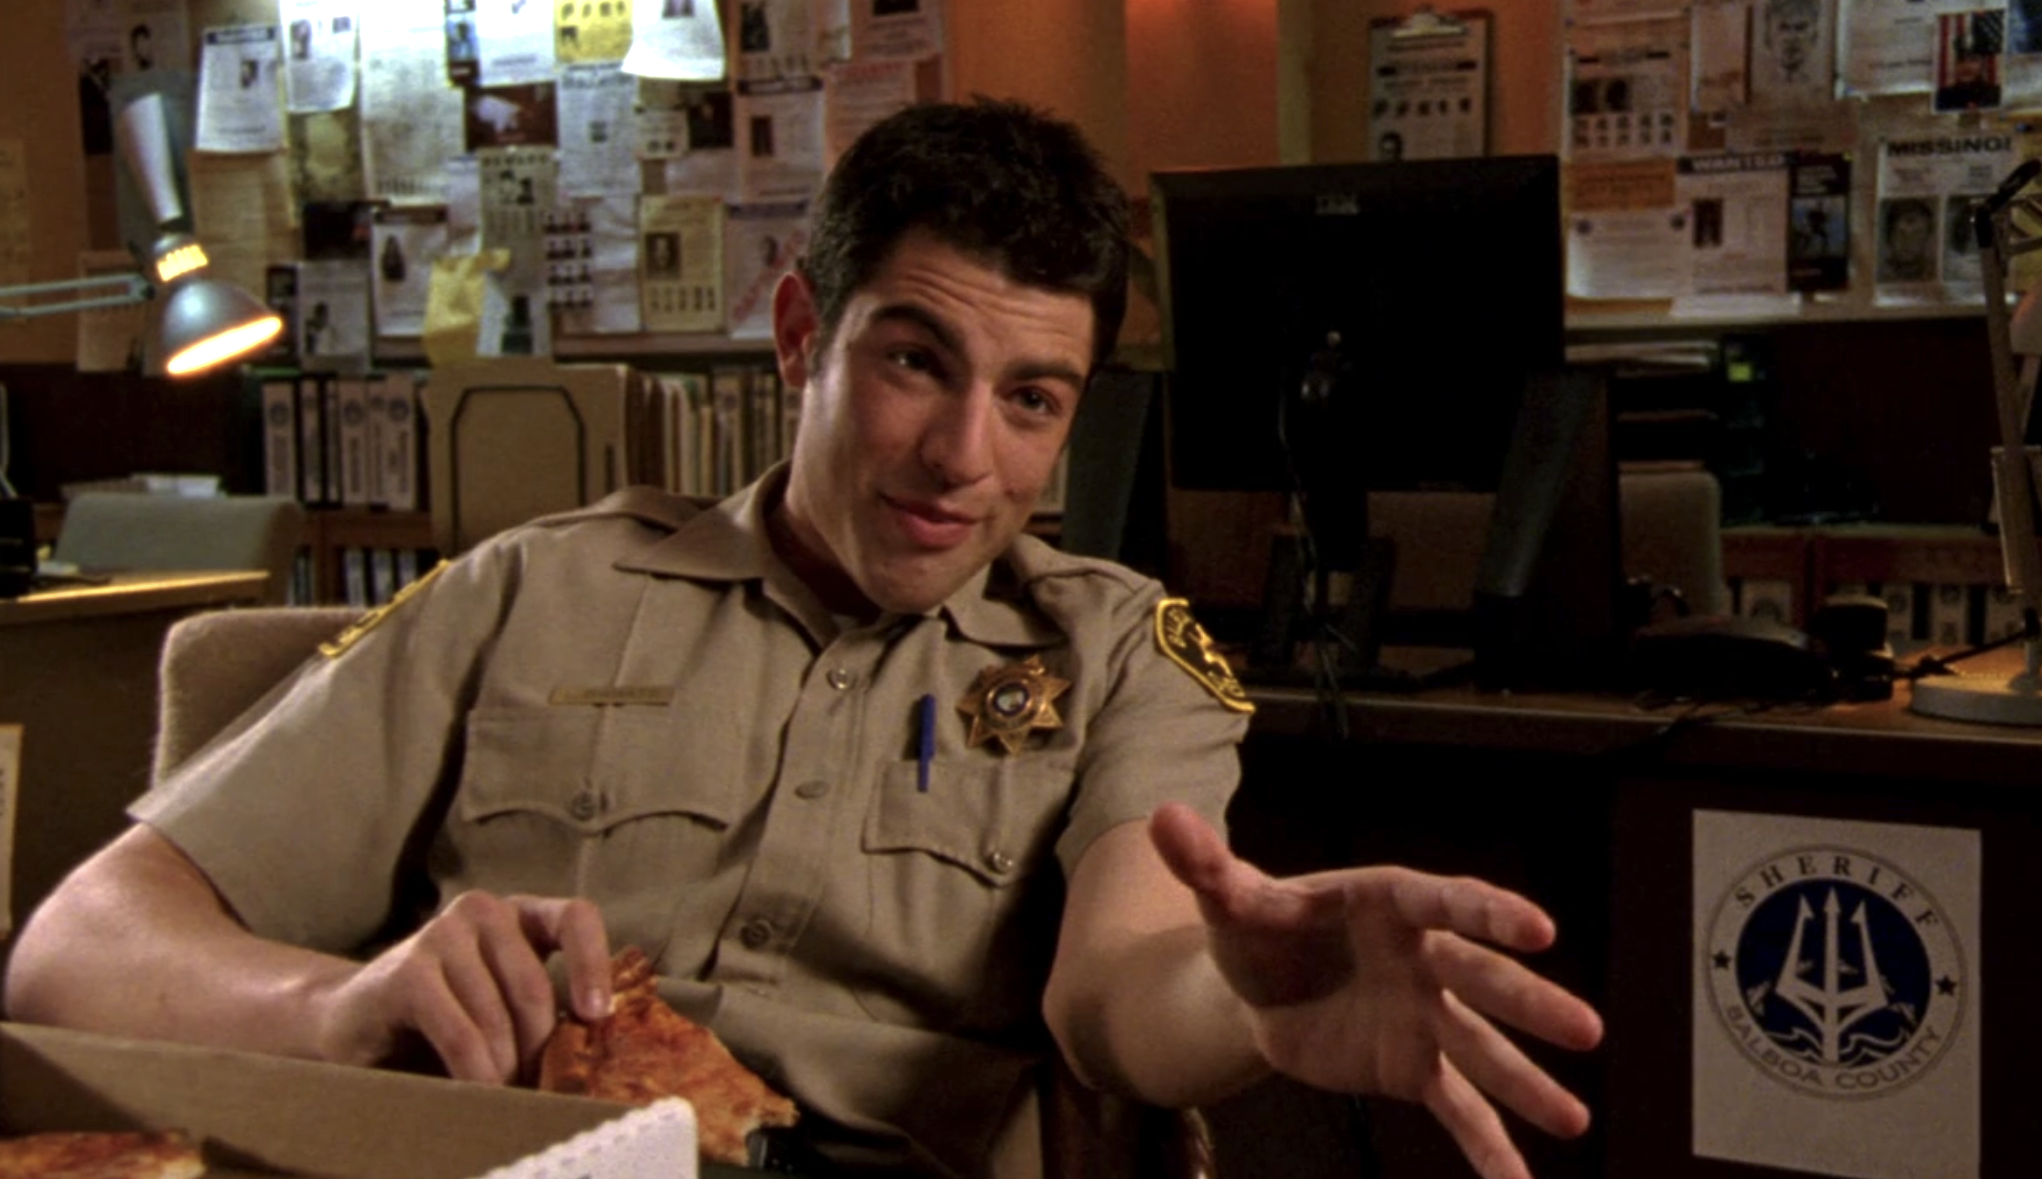 Screenshot of S1E11 of Veronica Mars. Max Greenfield playing Deputy Leo in his beige deputy uniform holds a slice of pizza in one hand and with the other is gesturing at an off-screen Veronica.